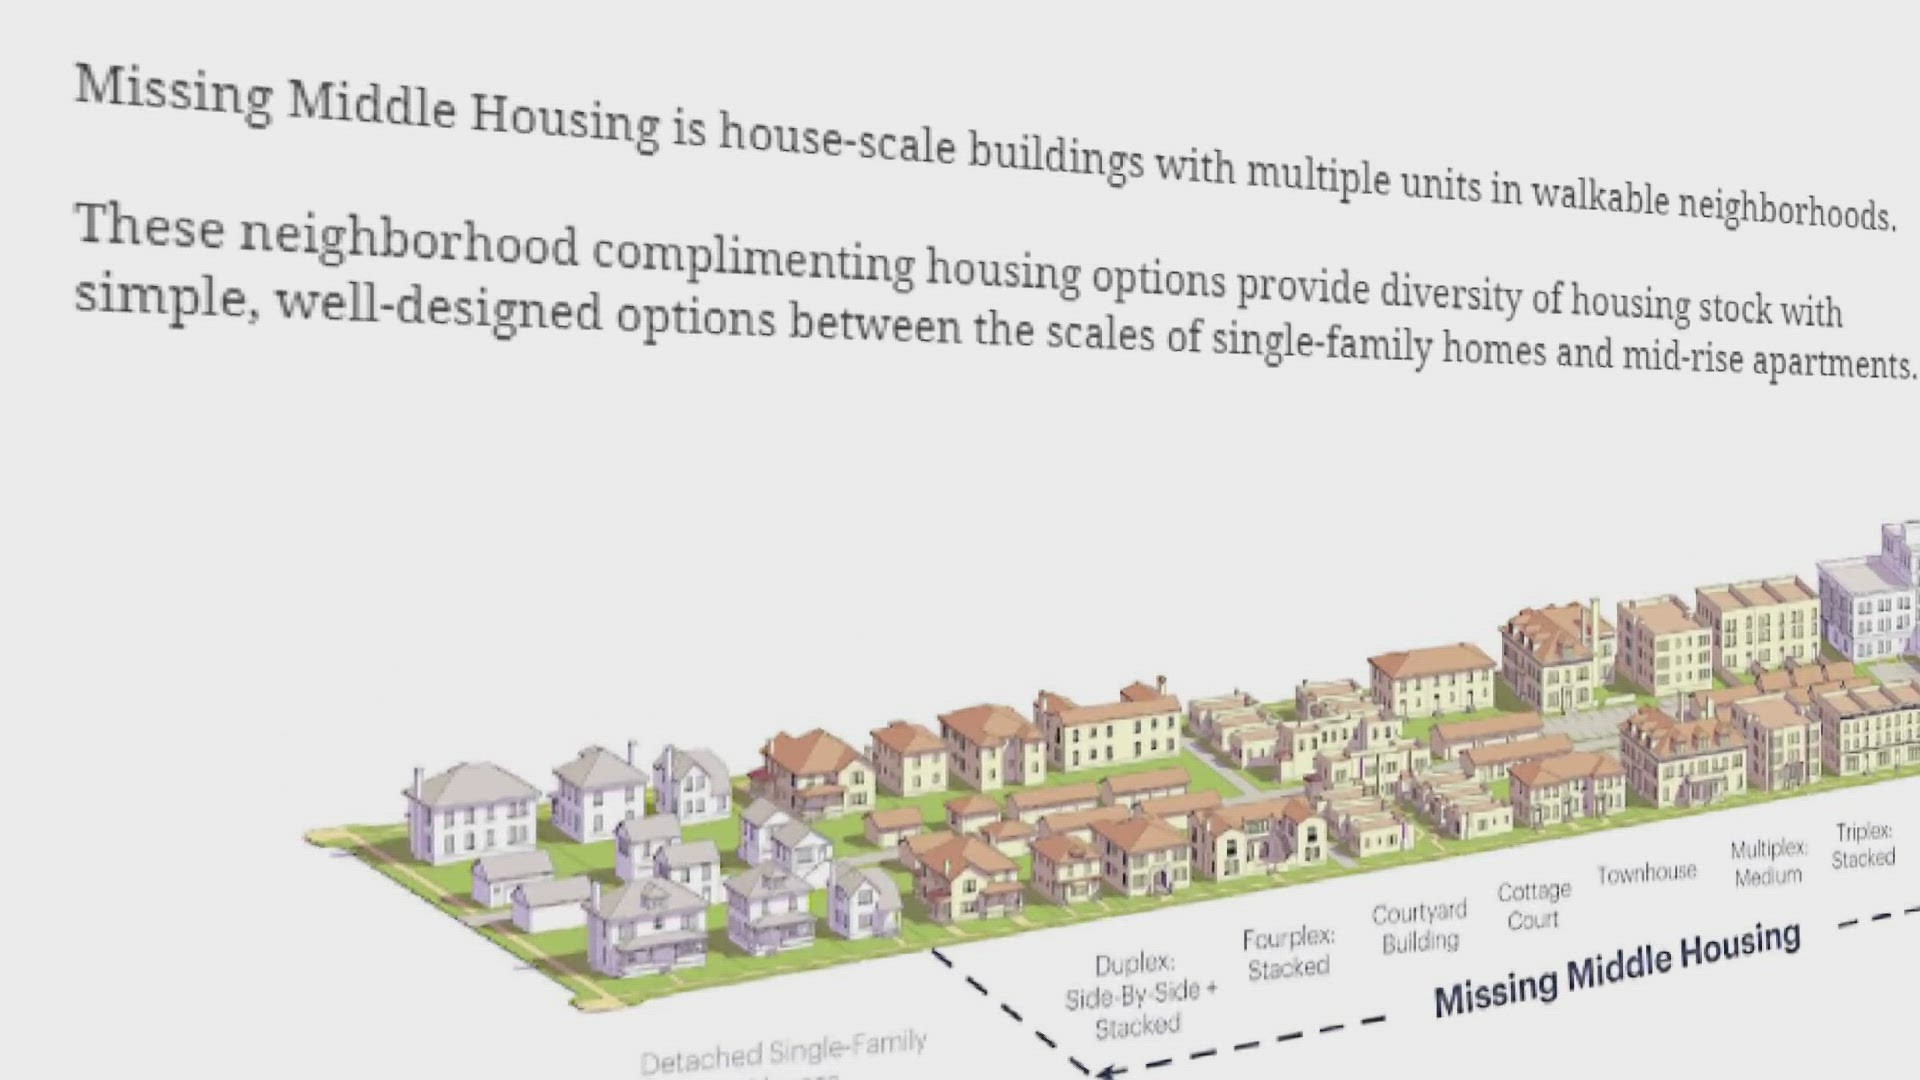 "Missing Middle Housing" includes homes like duplexes and townhomes, meant to house more people with shared, walkable spaces.